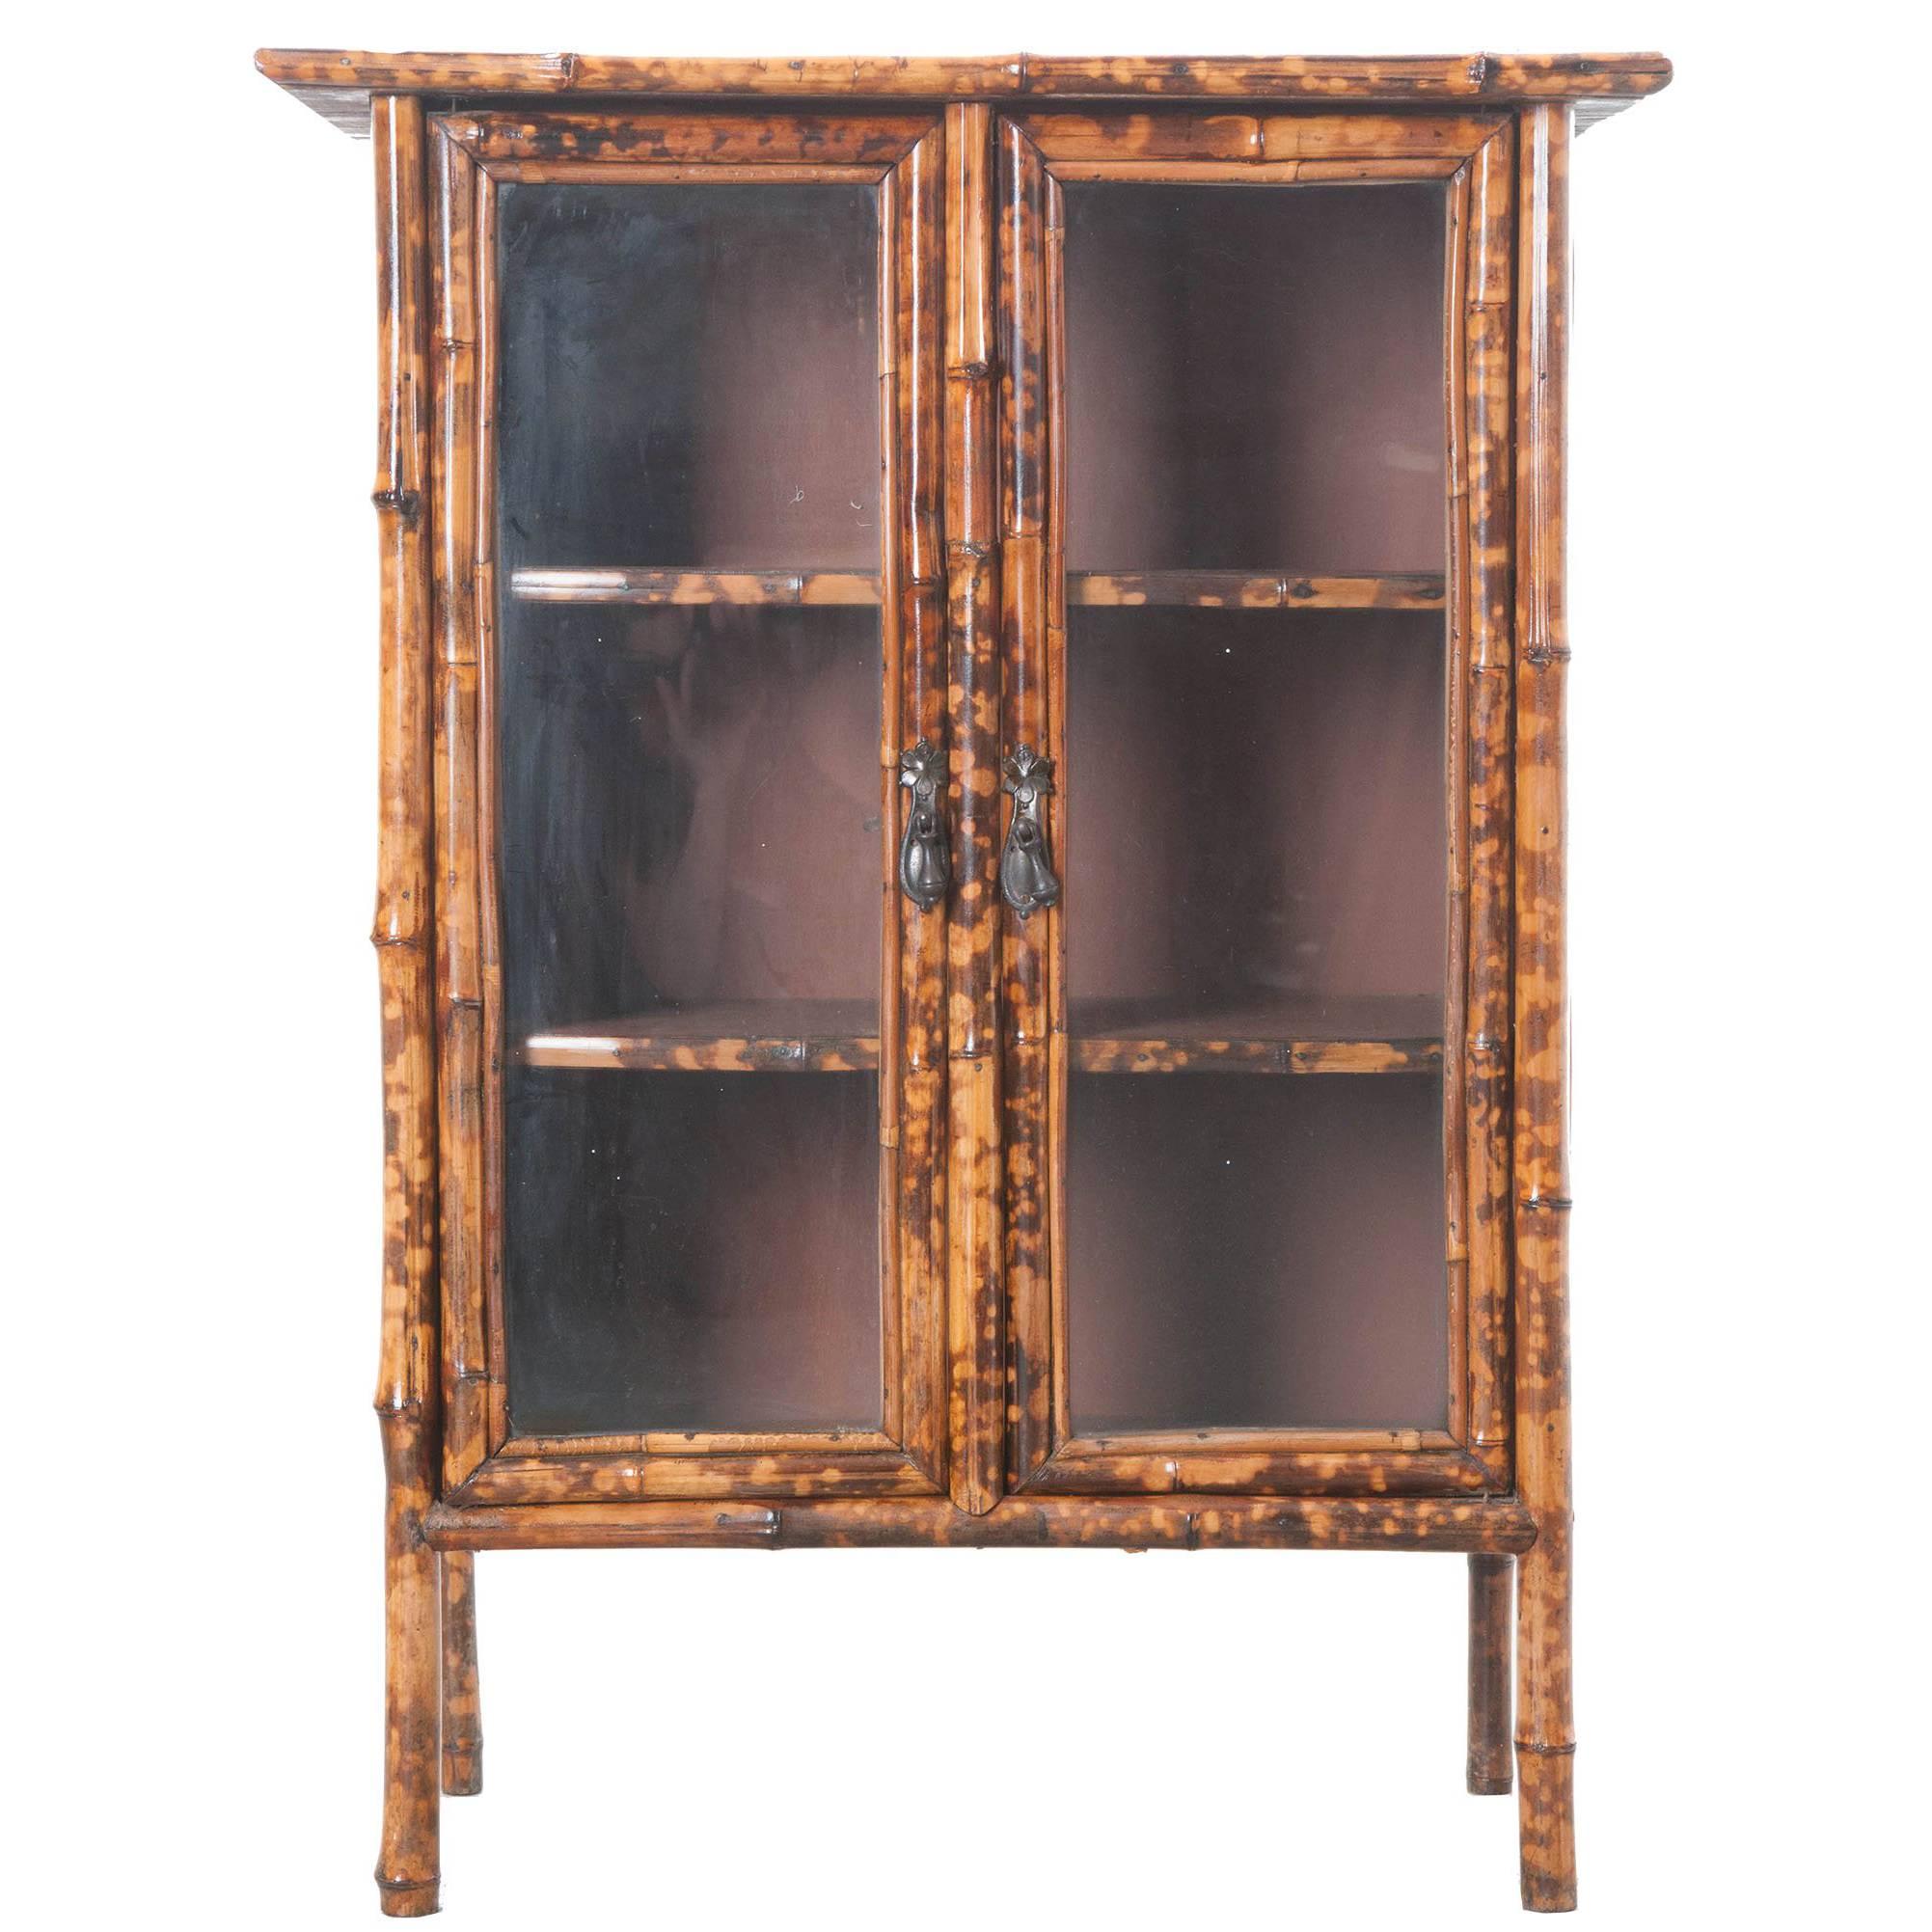 19th Century Victorian Bookcase with Glass Doors